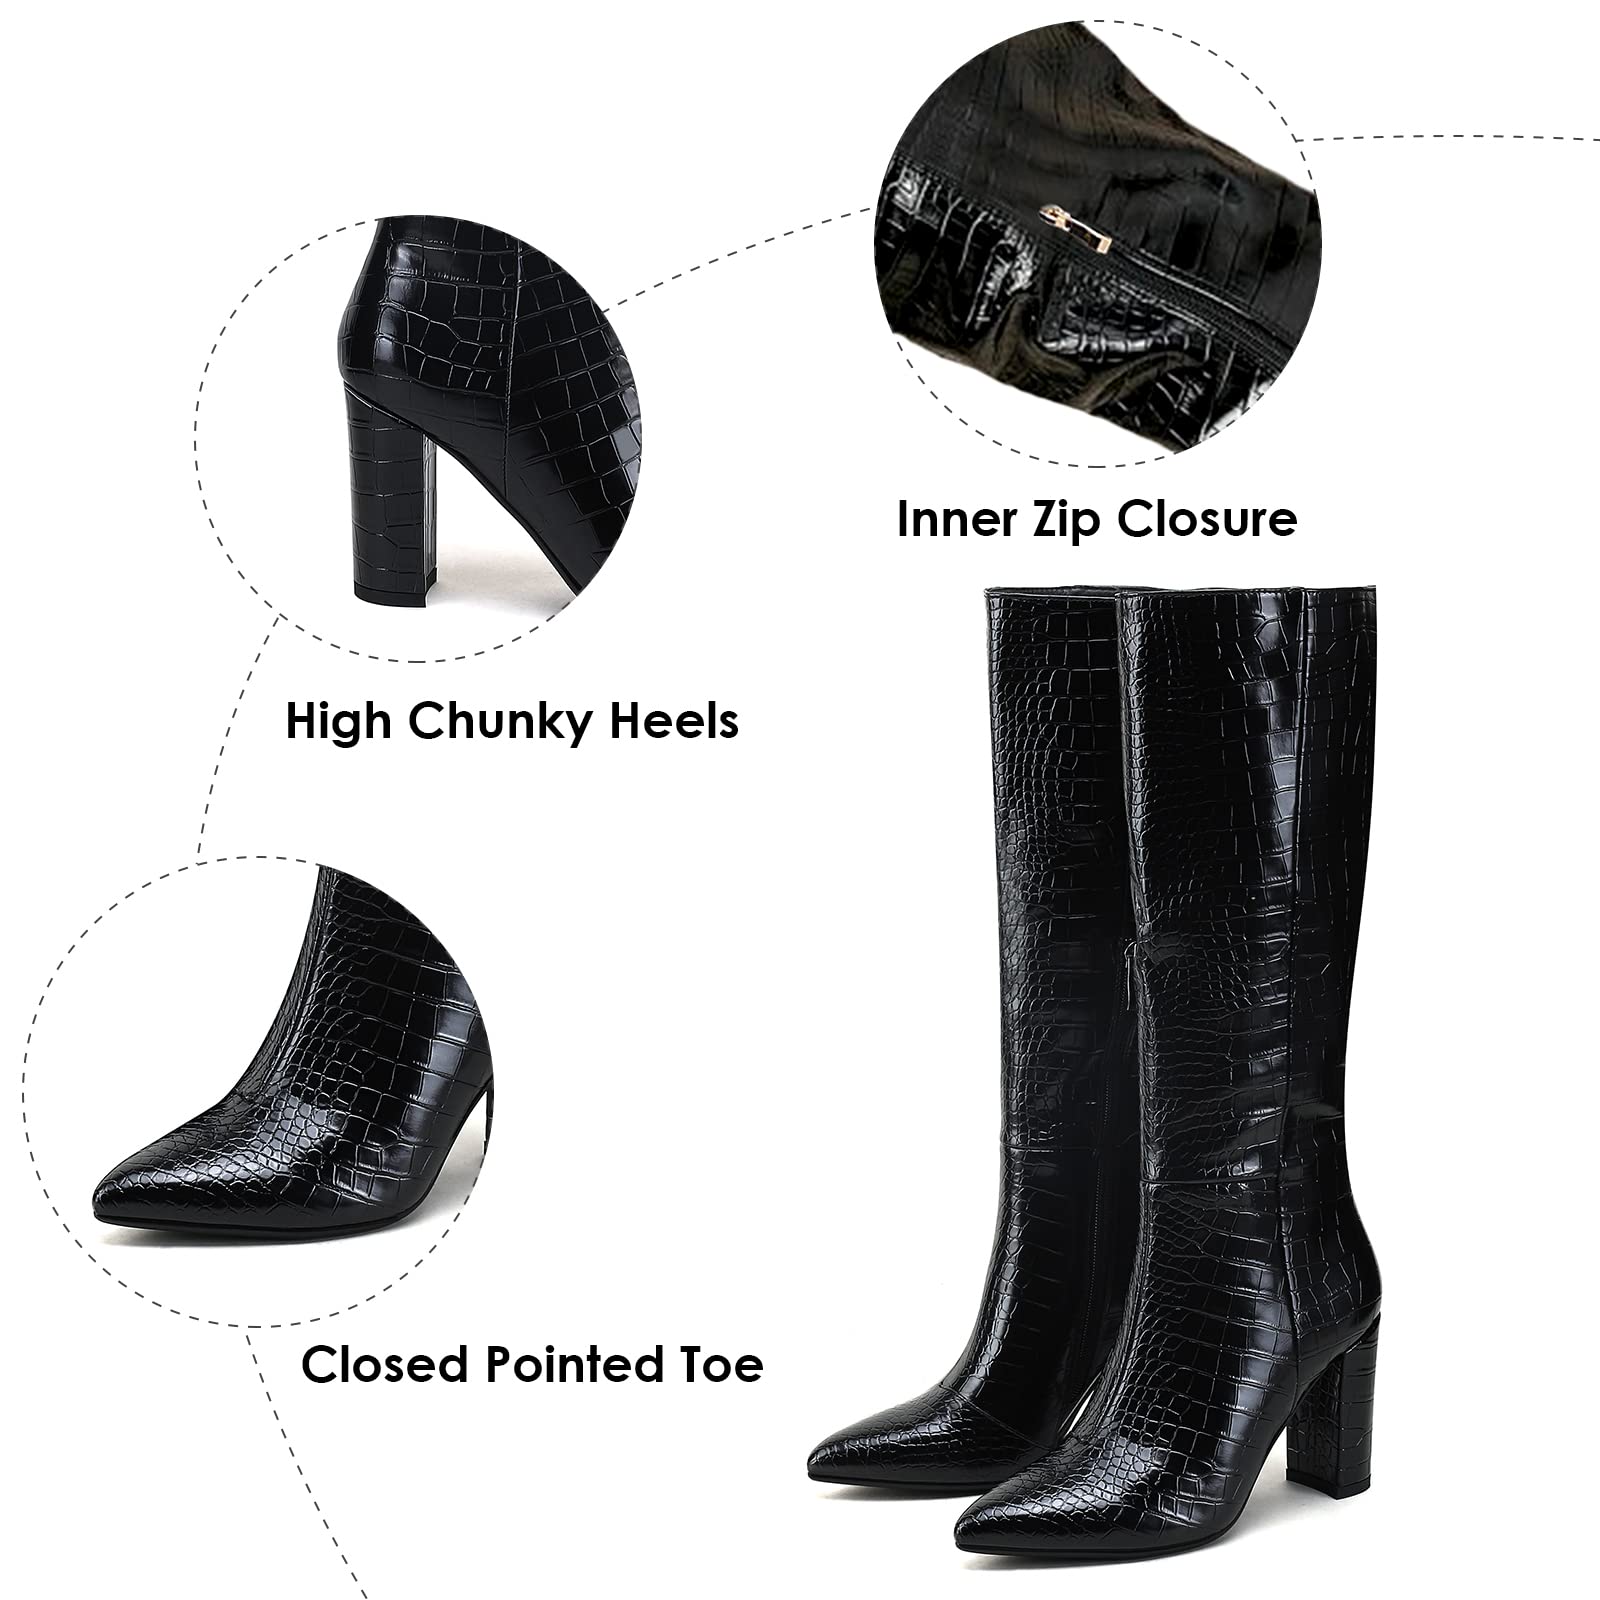 Modatope Knee High Boots Women Riding Boots for Women Tall Boots Long Boots Calf High Boots GoGo Boots Chunky Faux Crocodile Boots Block Heel Pointed Toe Boots Size 6-11